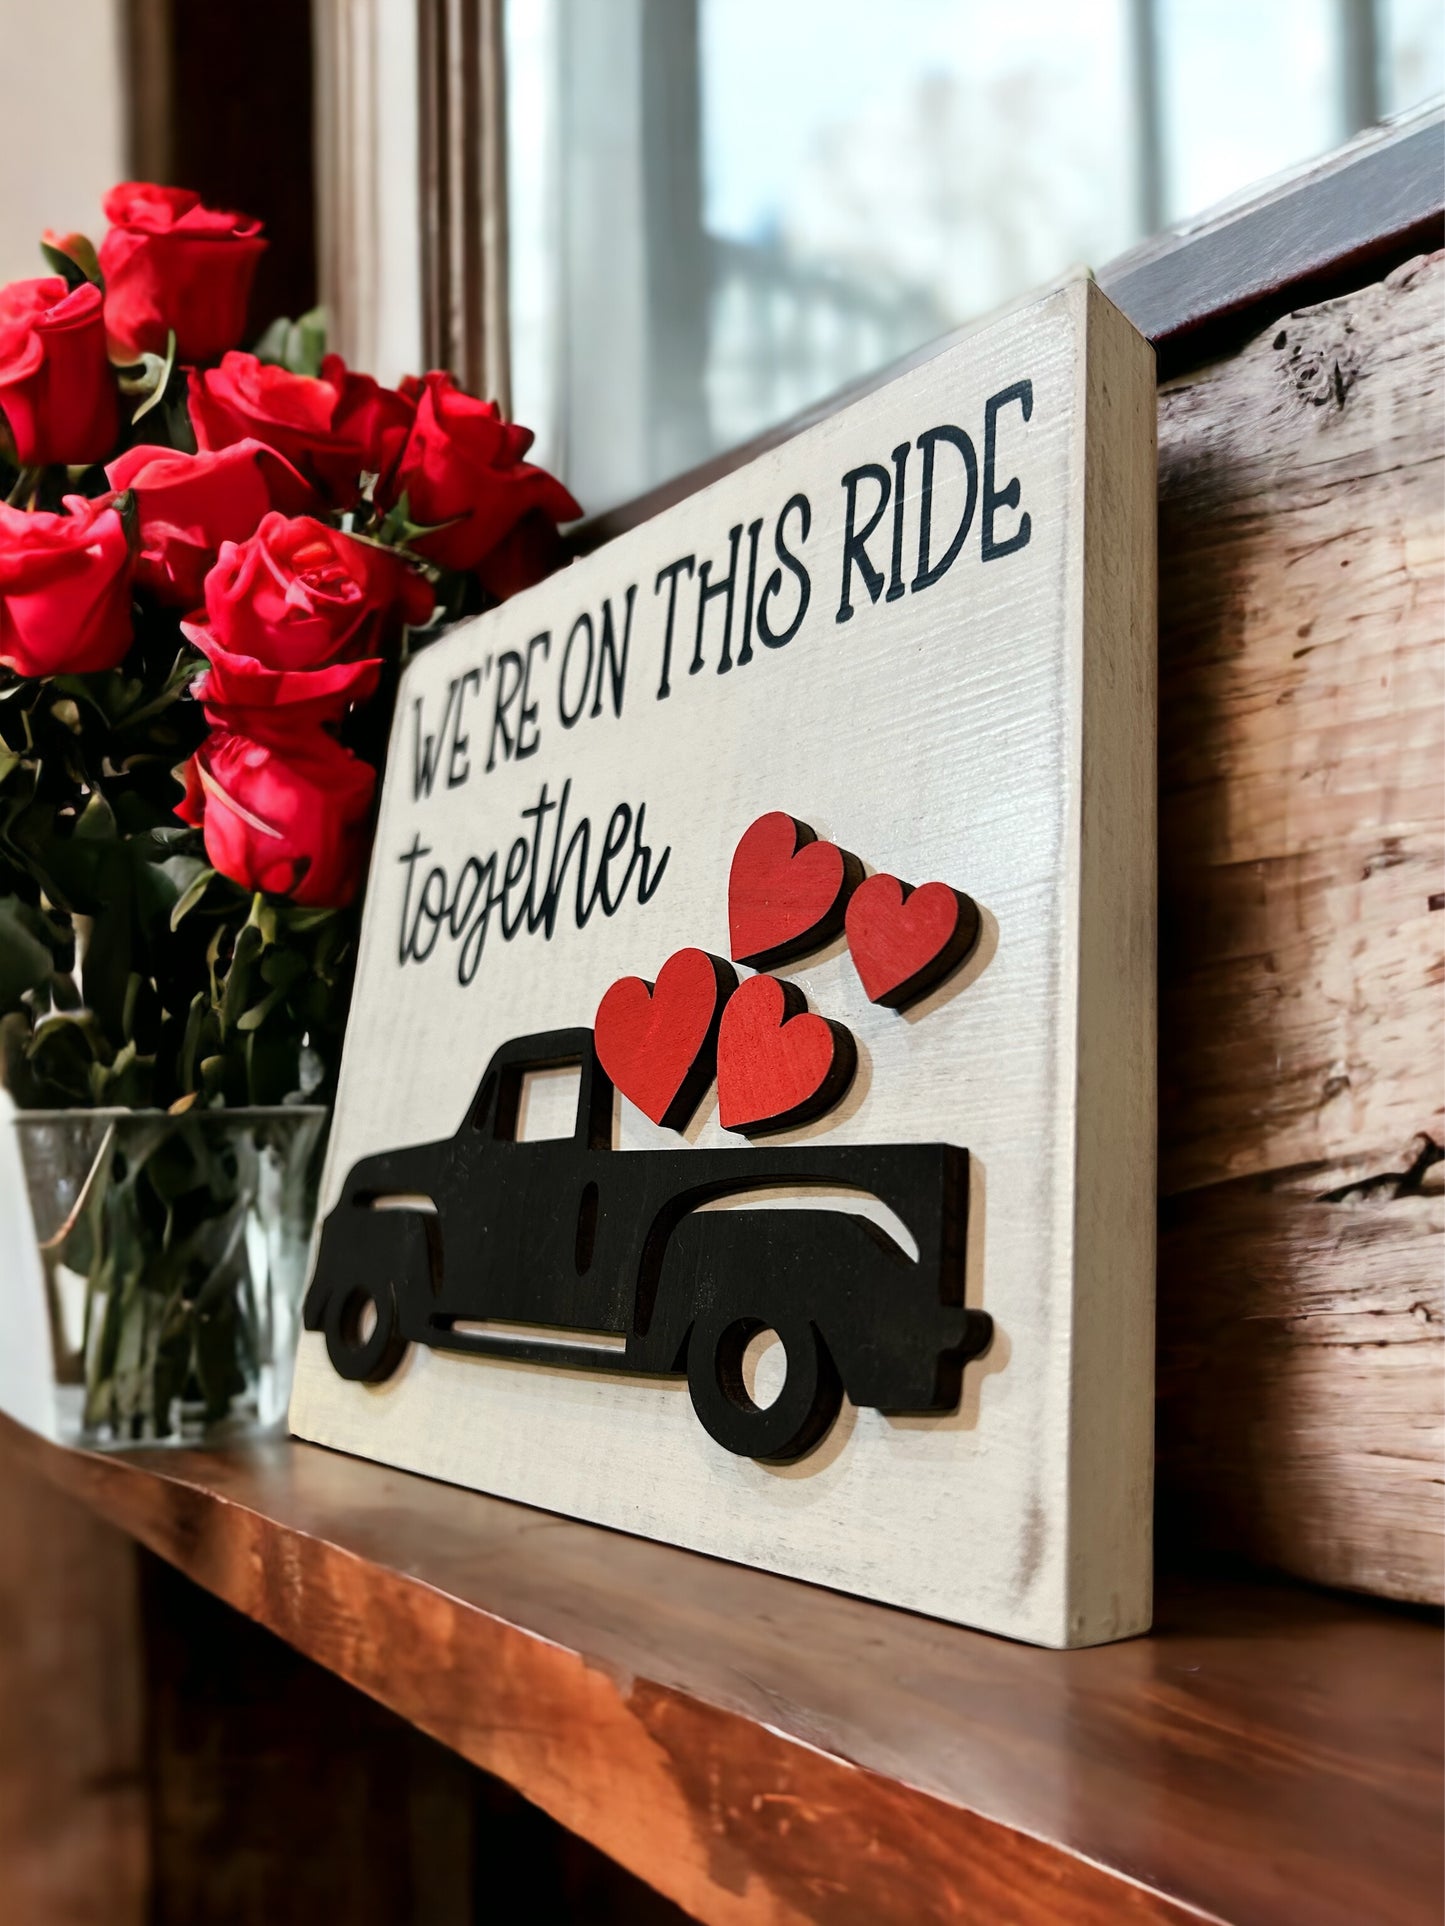 We’re On This Ride Together - Rustic Valentine’s Day Sign